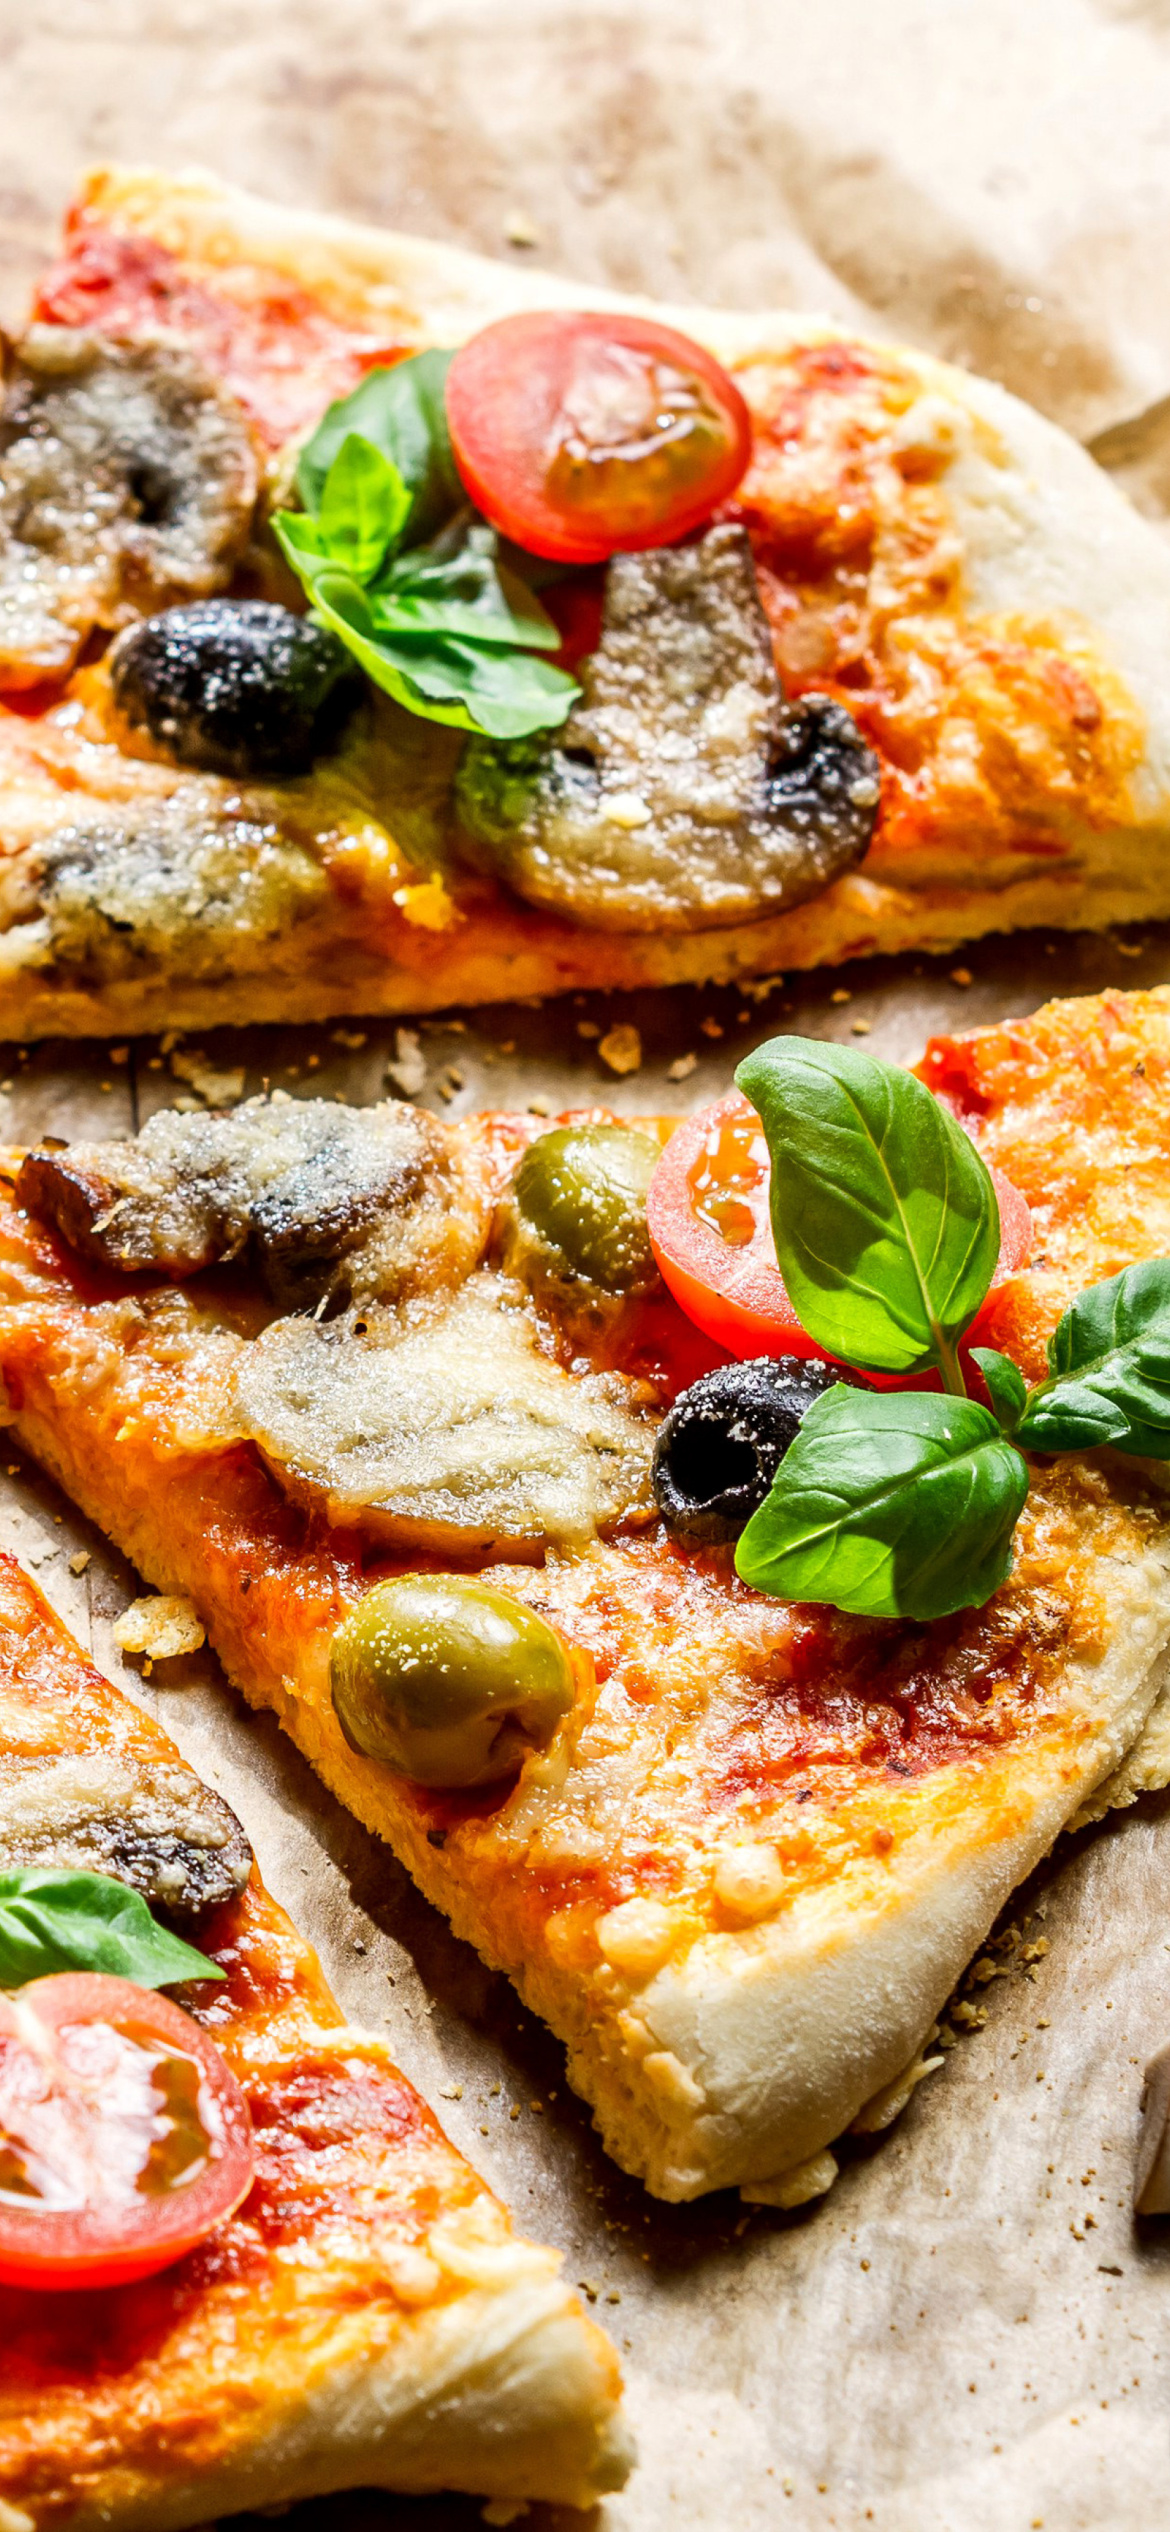 Pizza with olives screenshot #1 1170x2532